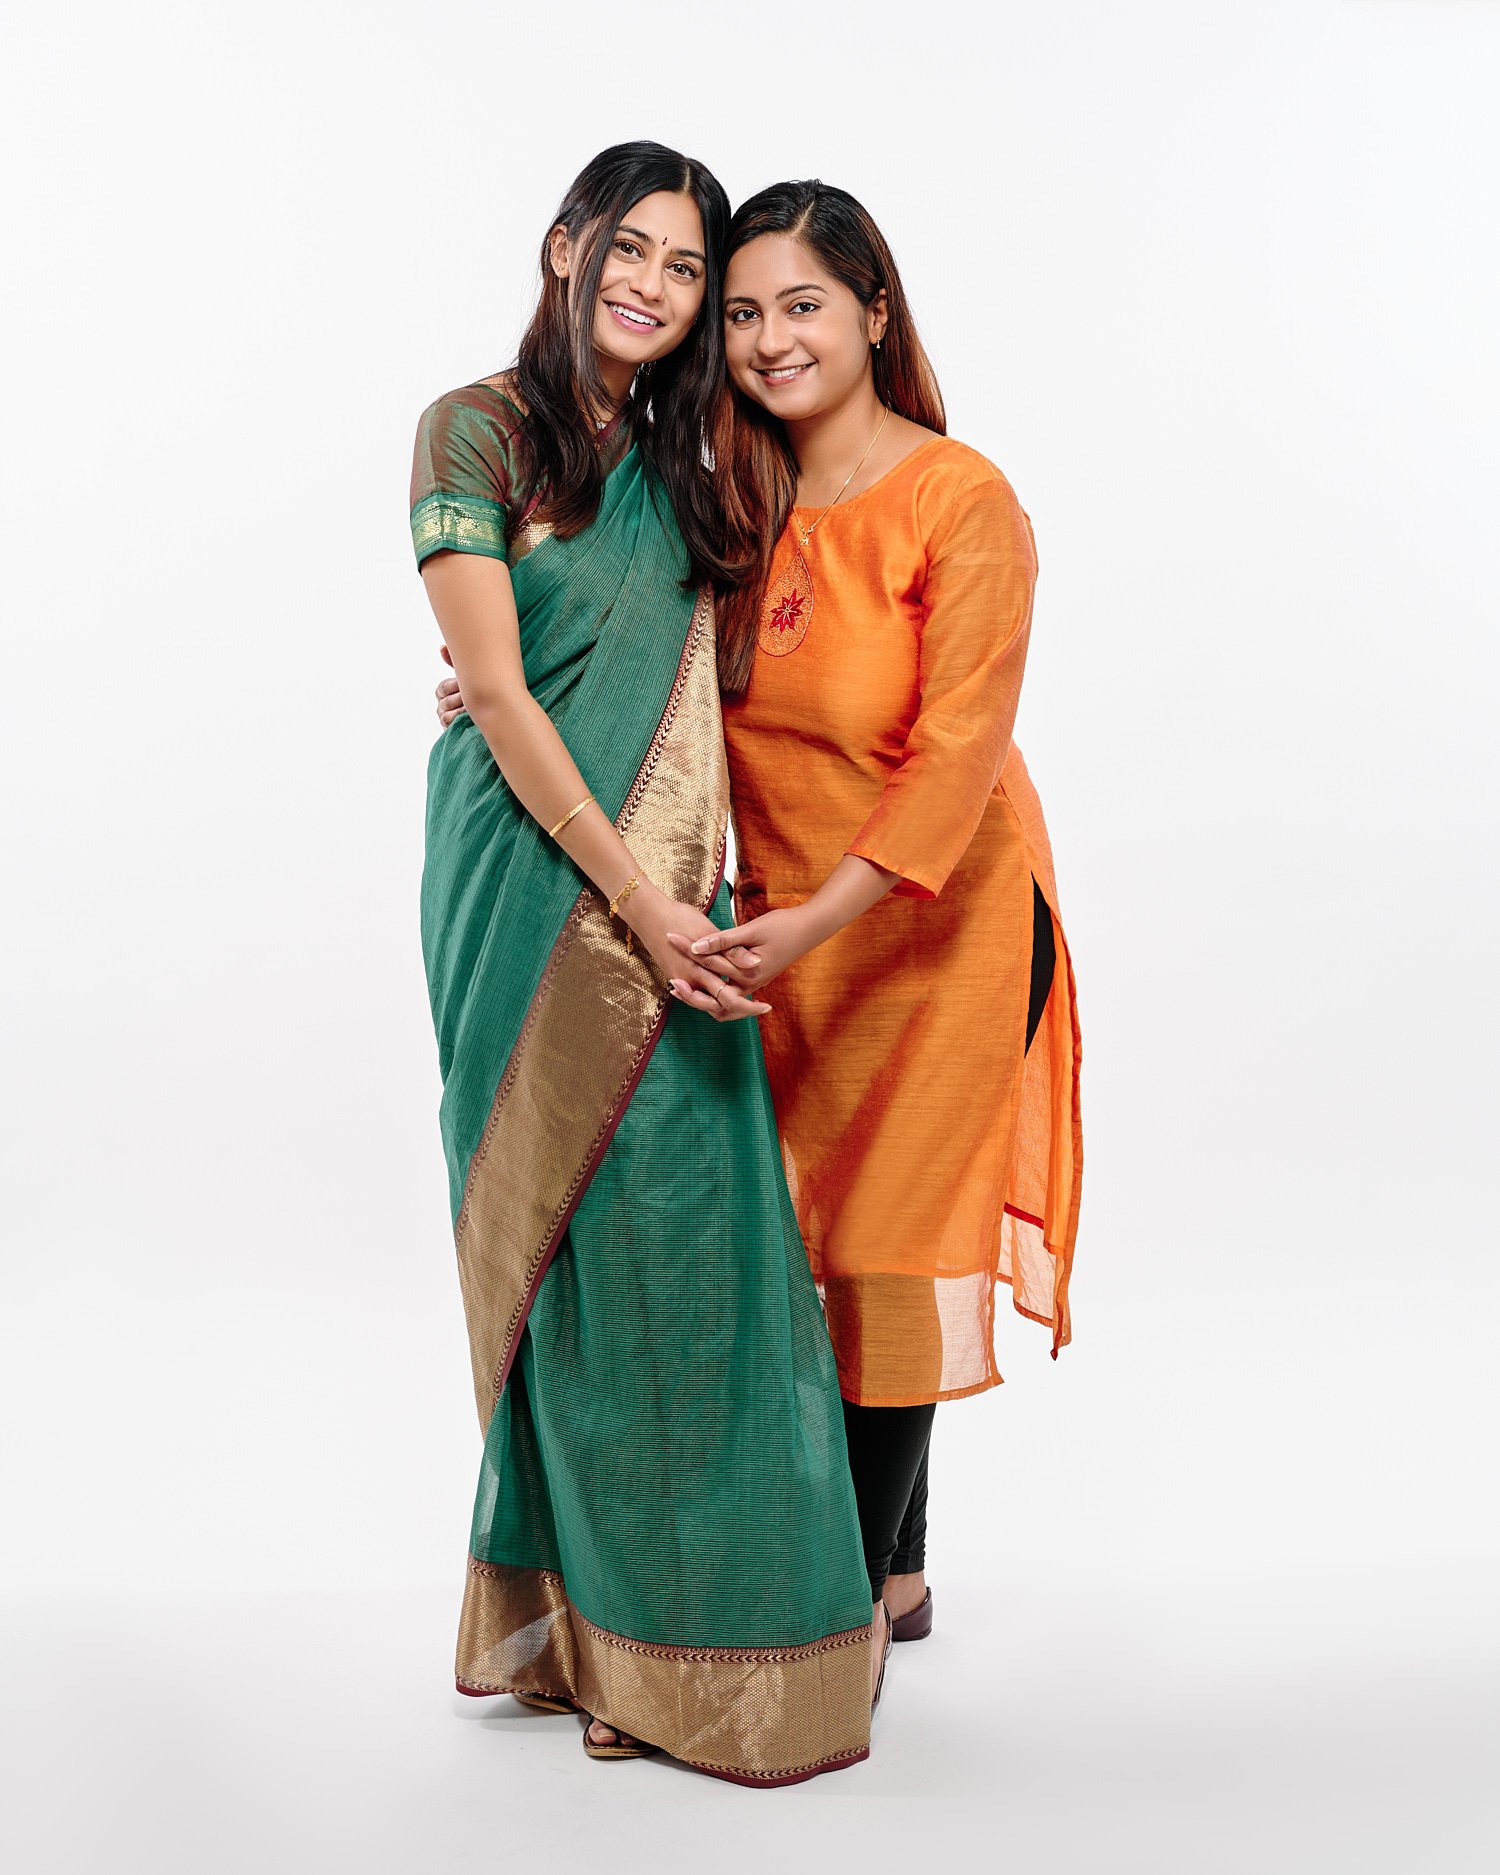  Mohandas Parappath and his wife Kanthi Menon are posing for family portraits with their daughters Kamya and Maya in a photography studio. Their bright colorful dresses pop out against white background 